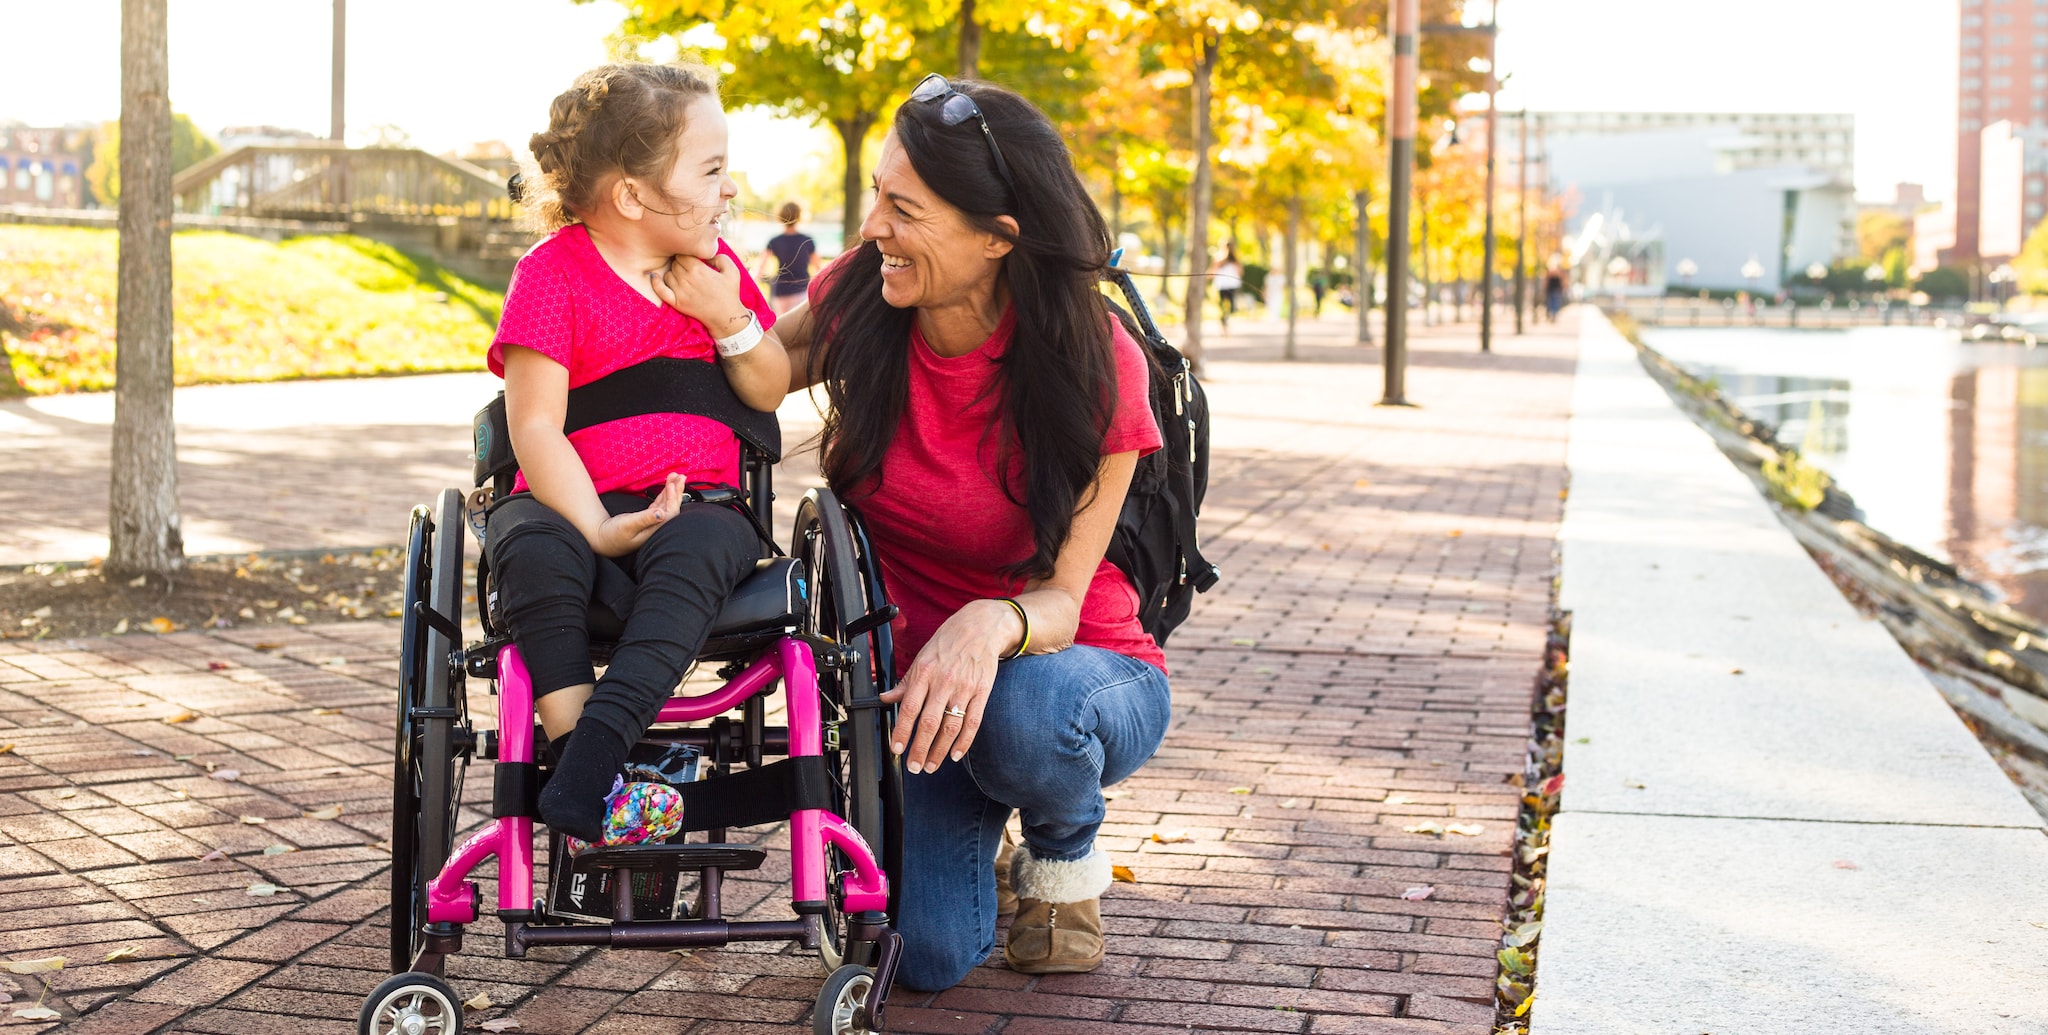 young girl with AFM in wheelchair laughing with her mom